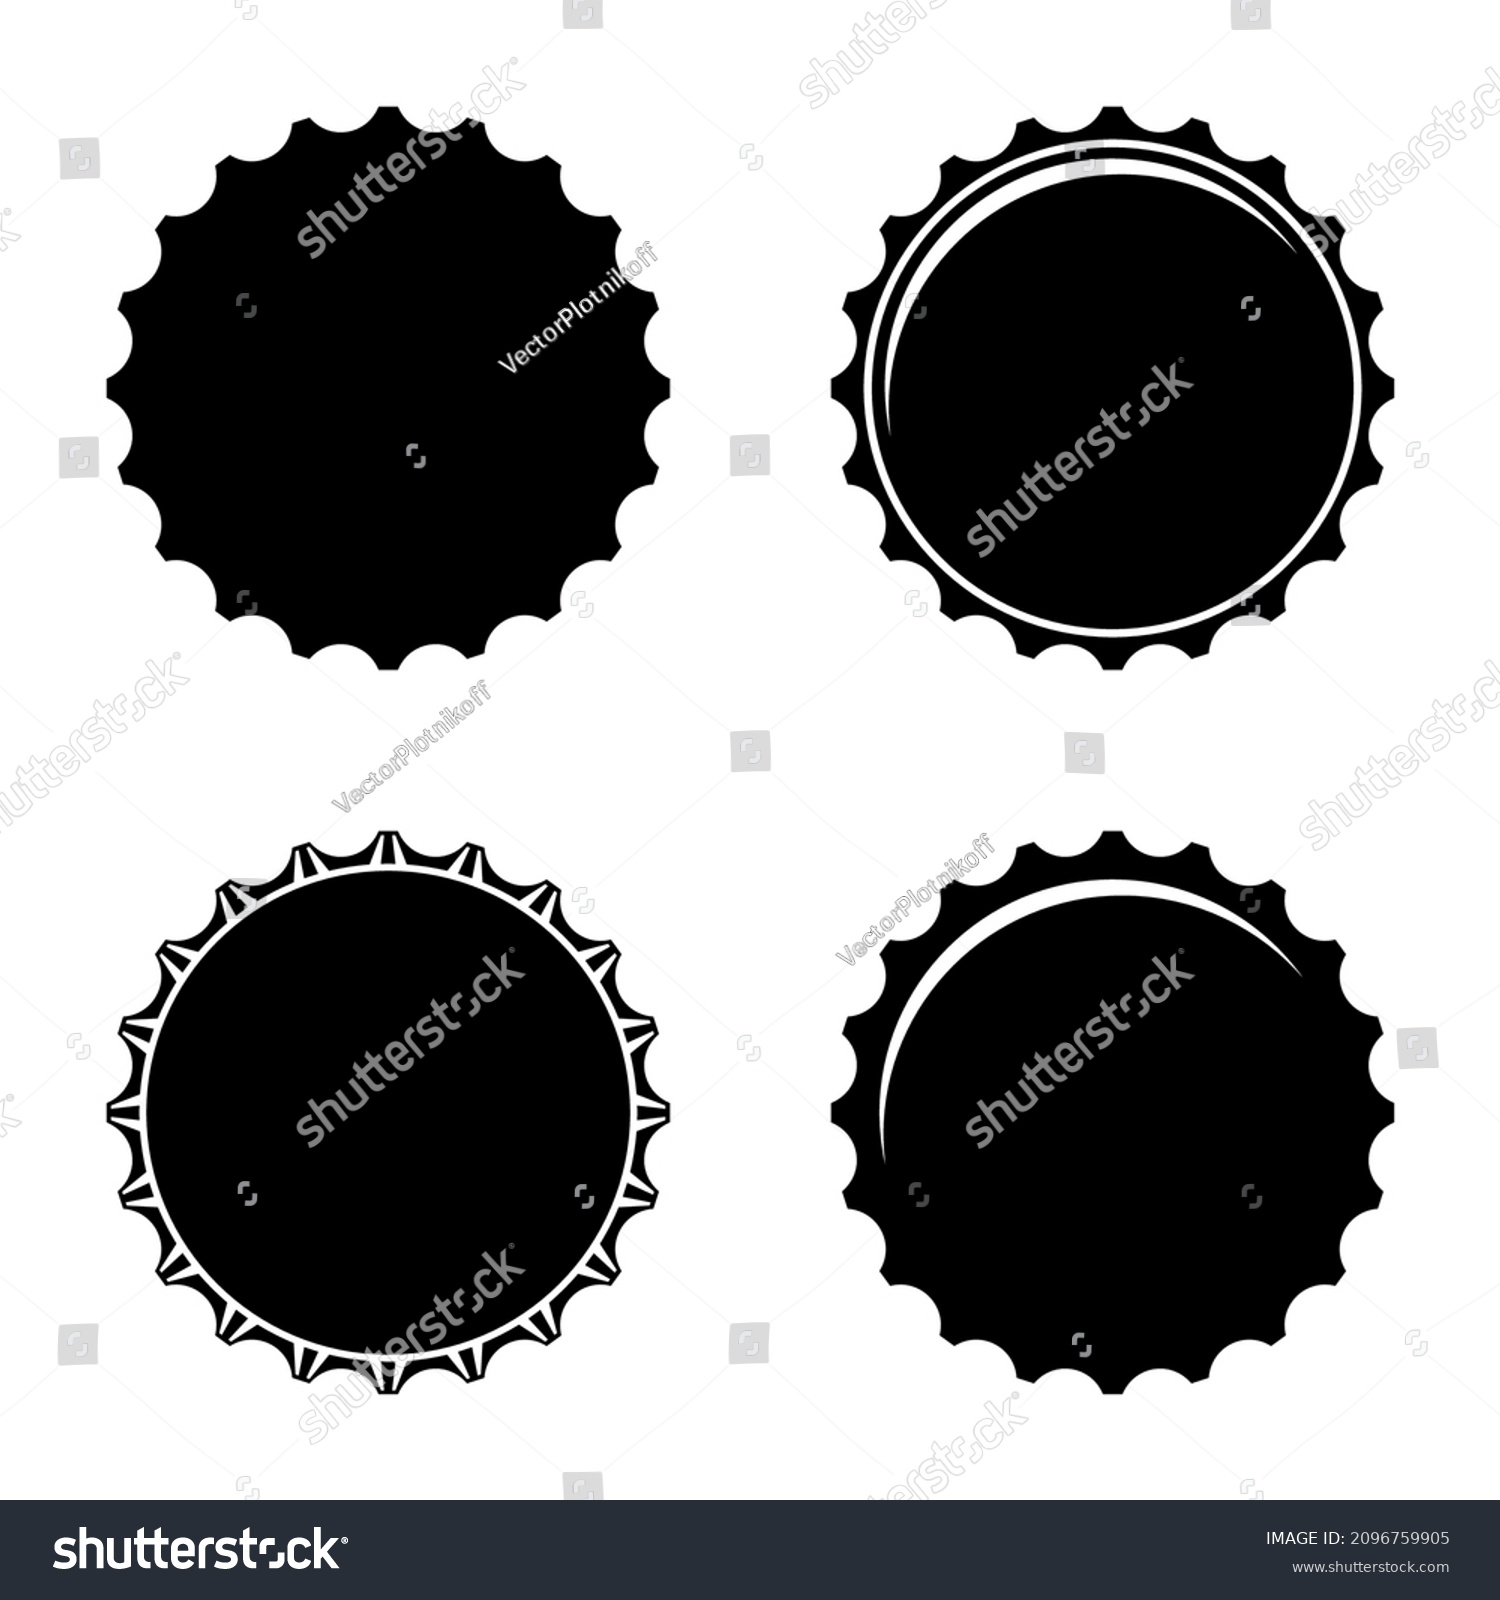 Bottle caps icons set isolated on white background. Labels in the form of bottle aluminum caps, Soda, juice or beer bottle tops icon. Vector illustration #2096759905